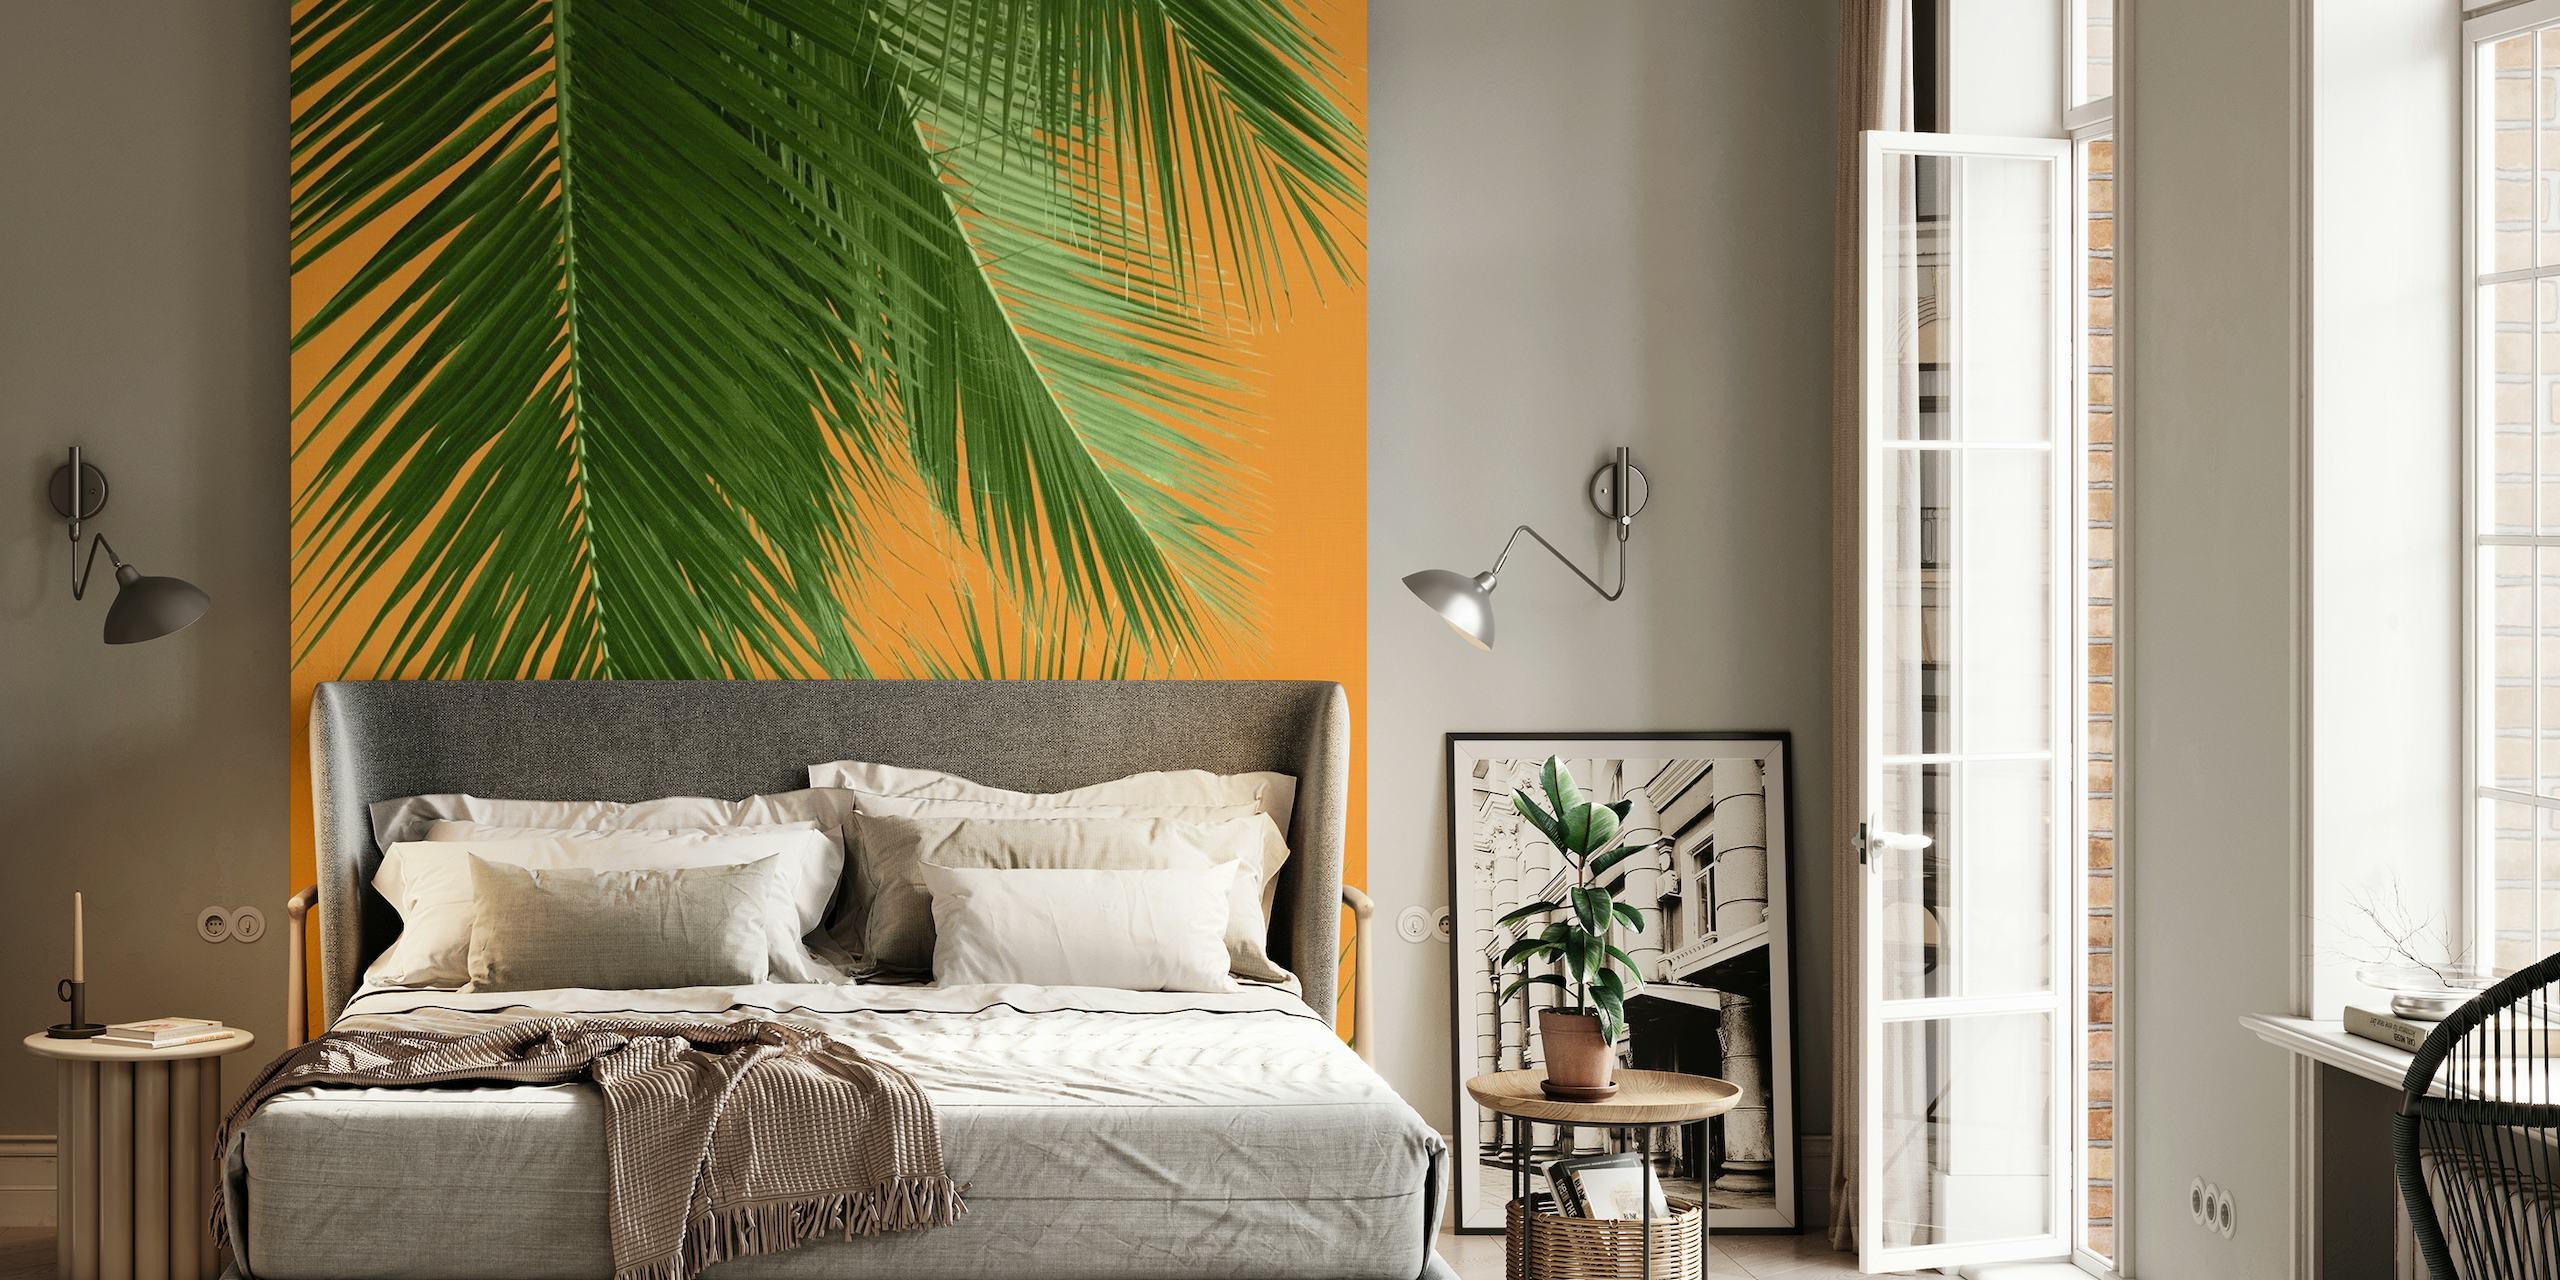 Green palm leaves pattern on orange background wall mural